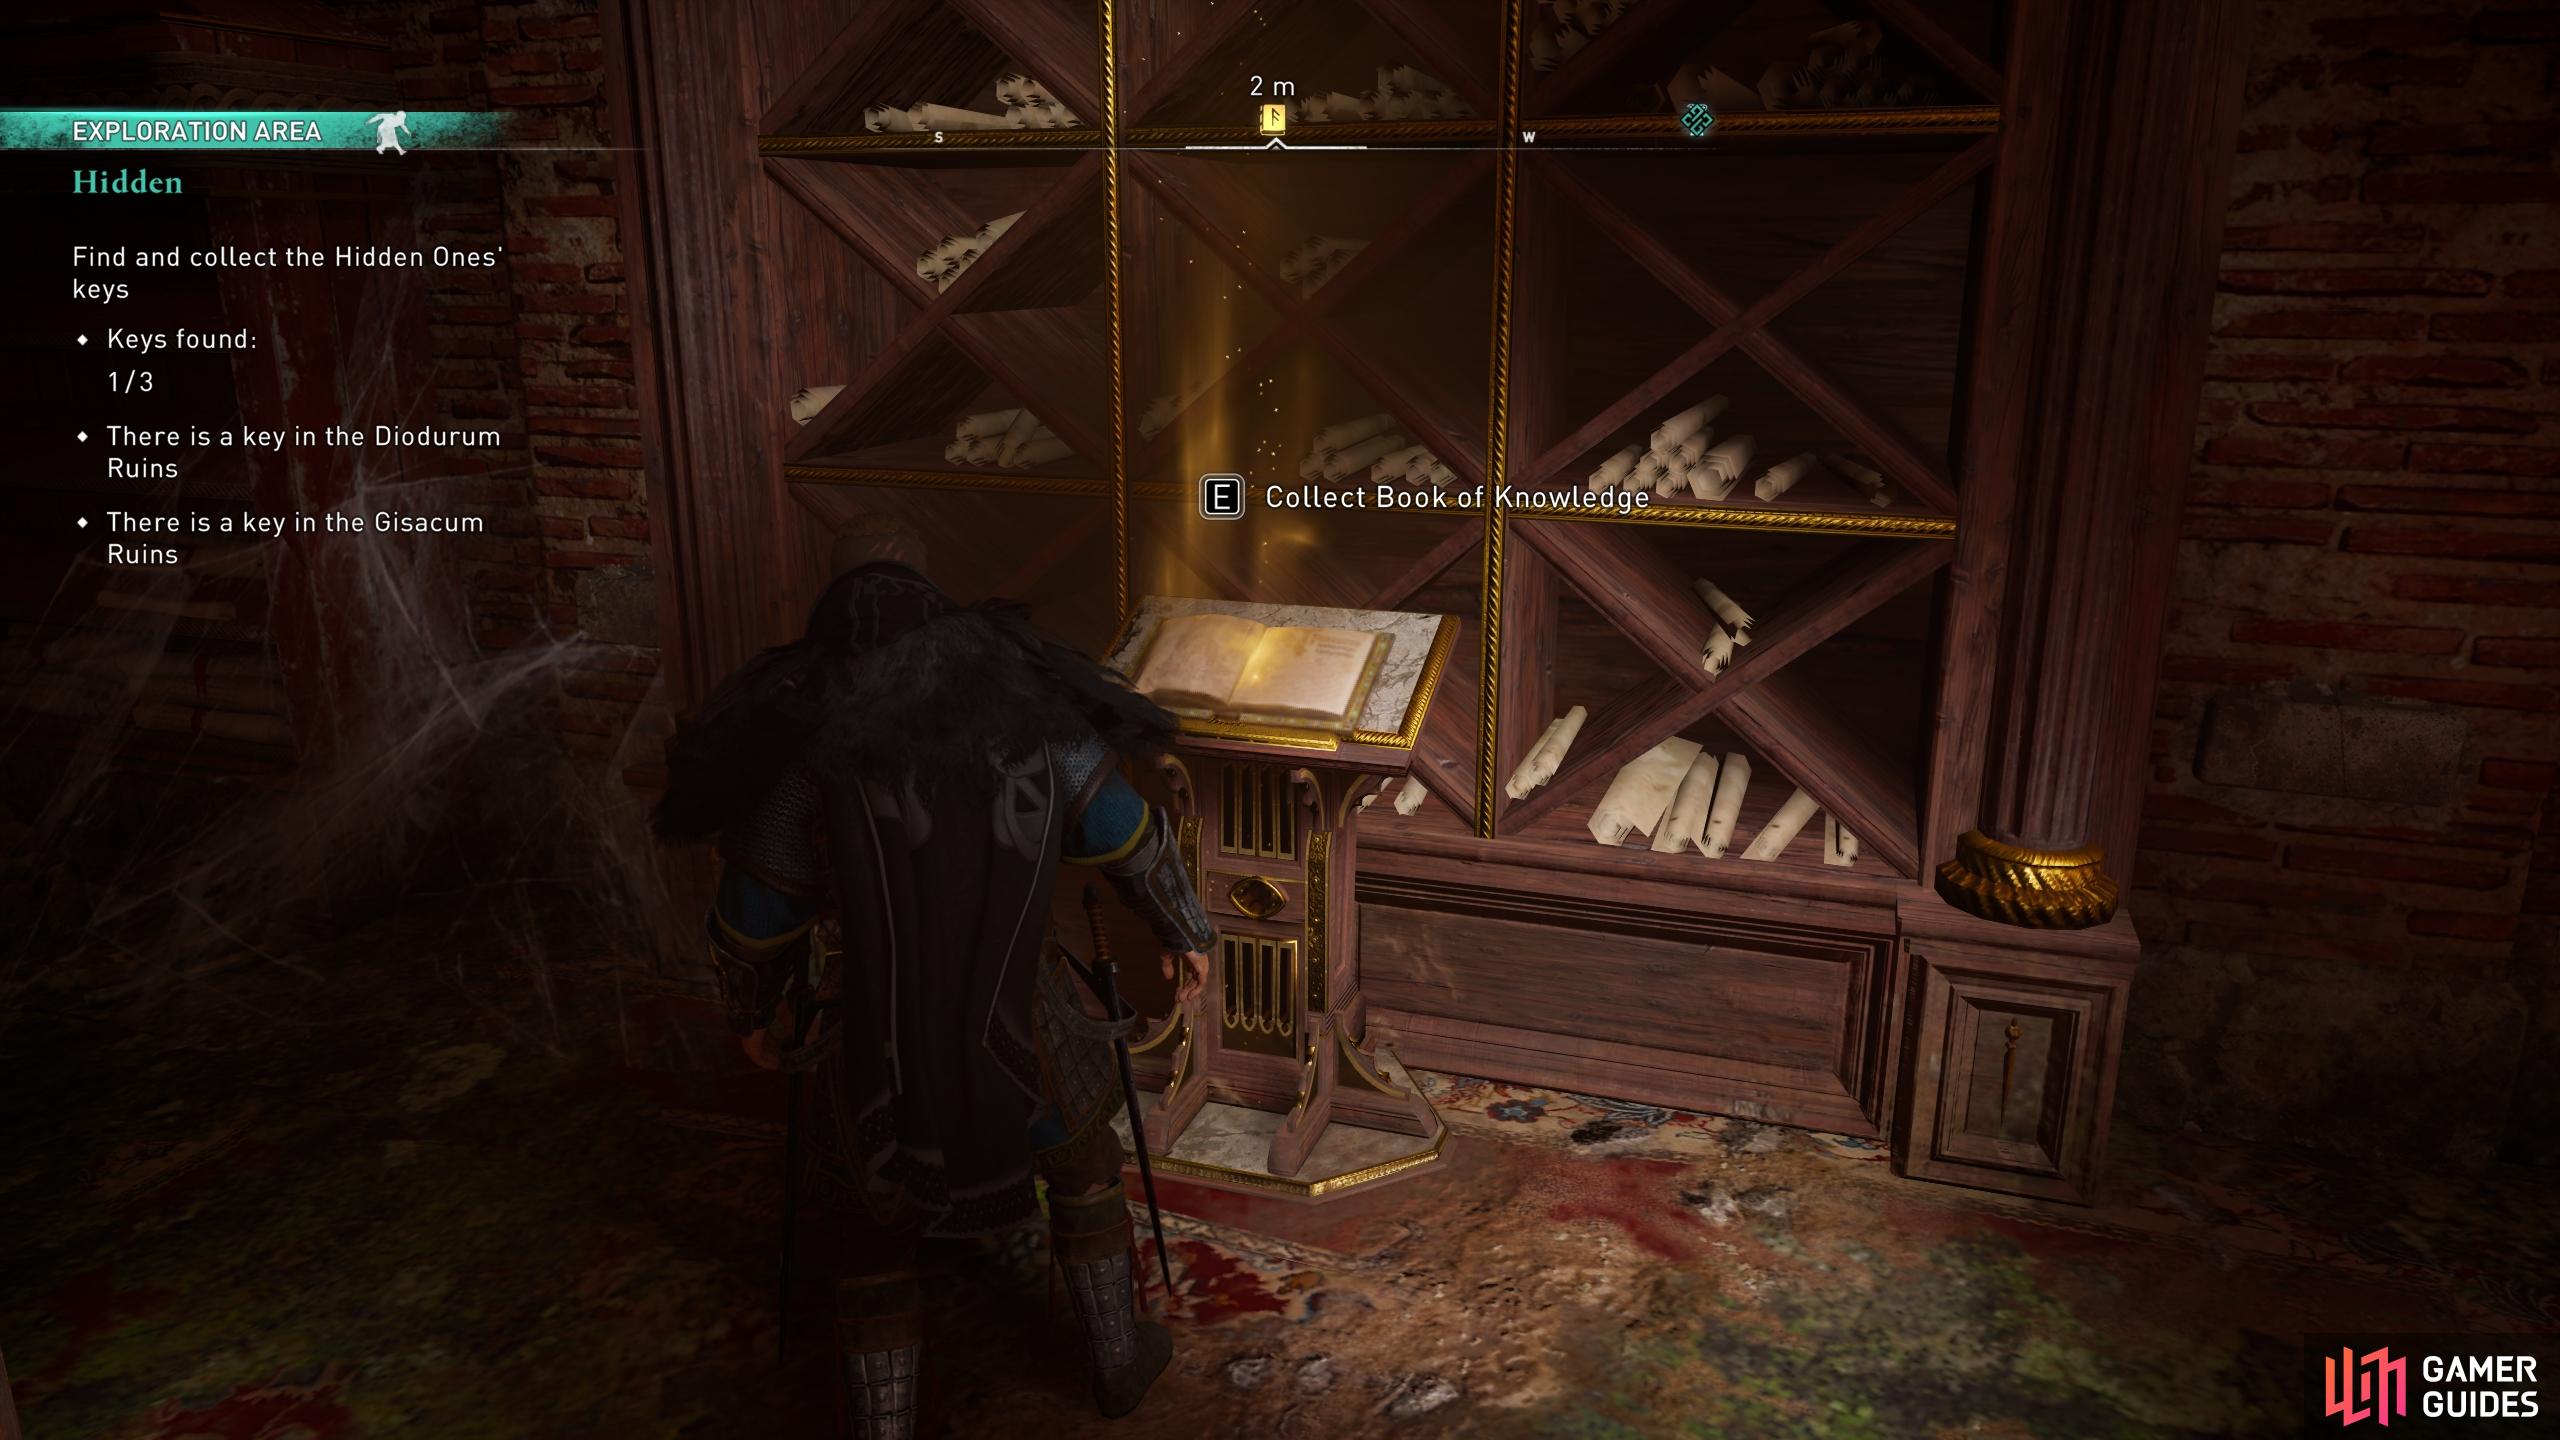 You'll find a Book of Knowledge within the bureau, providing the Golden Flame ability.